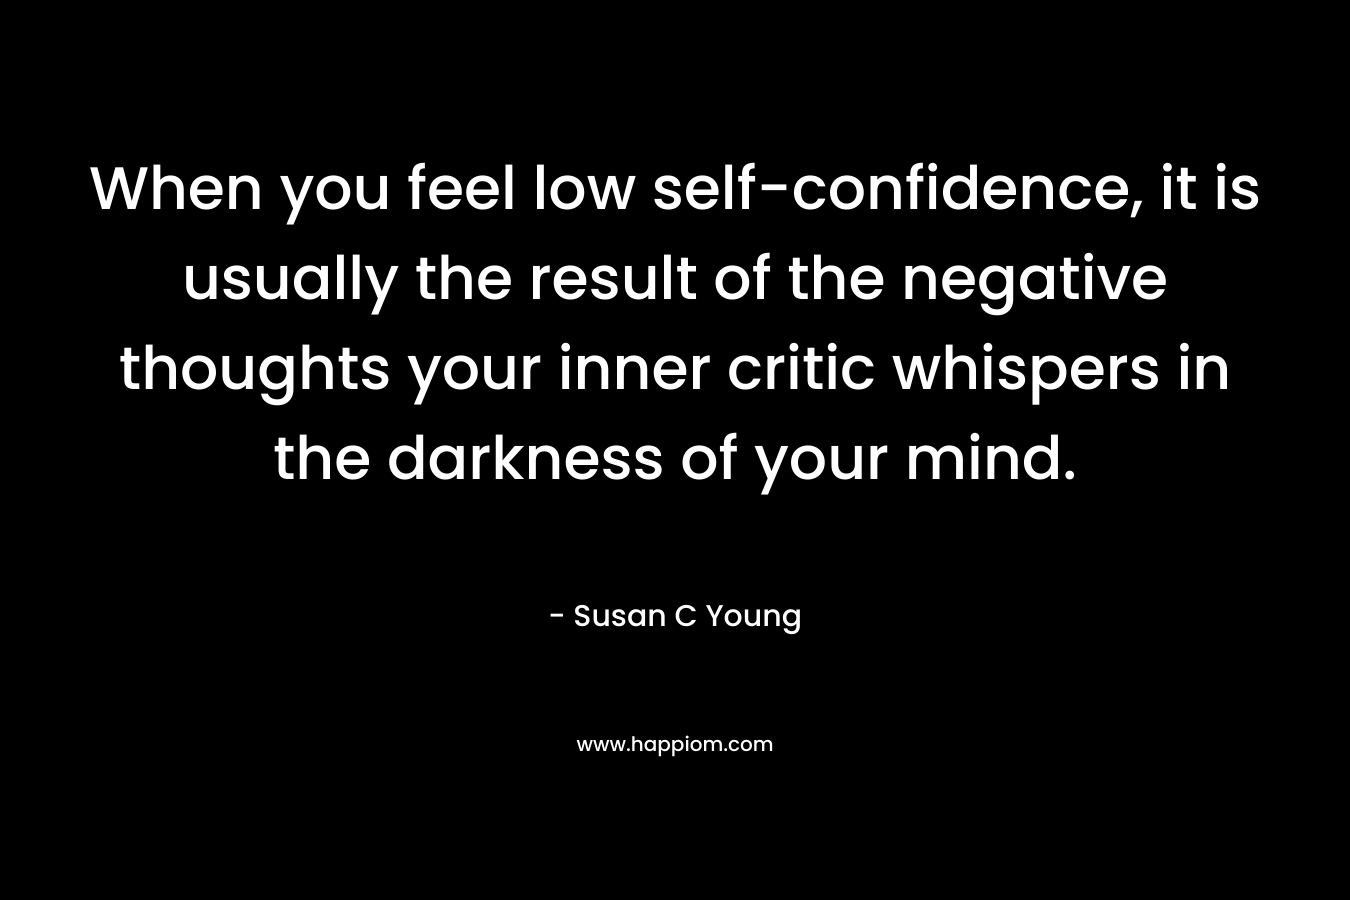 When you feel low self-confidence, it is usually the result of the negative thoughts your inner critic whispers in the darkness of your mind. – Susan C Young